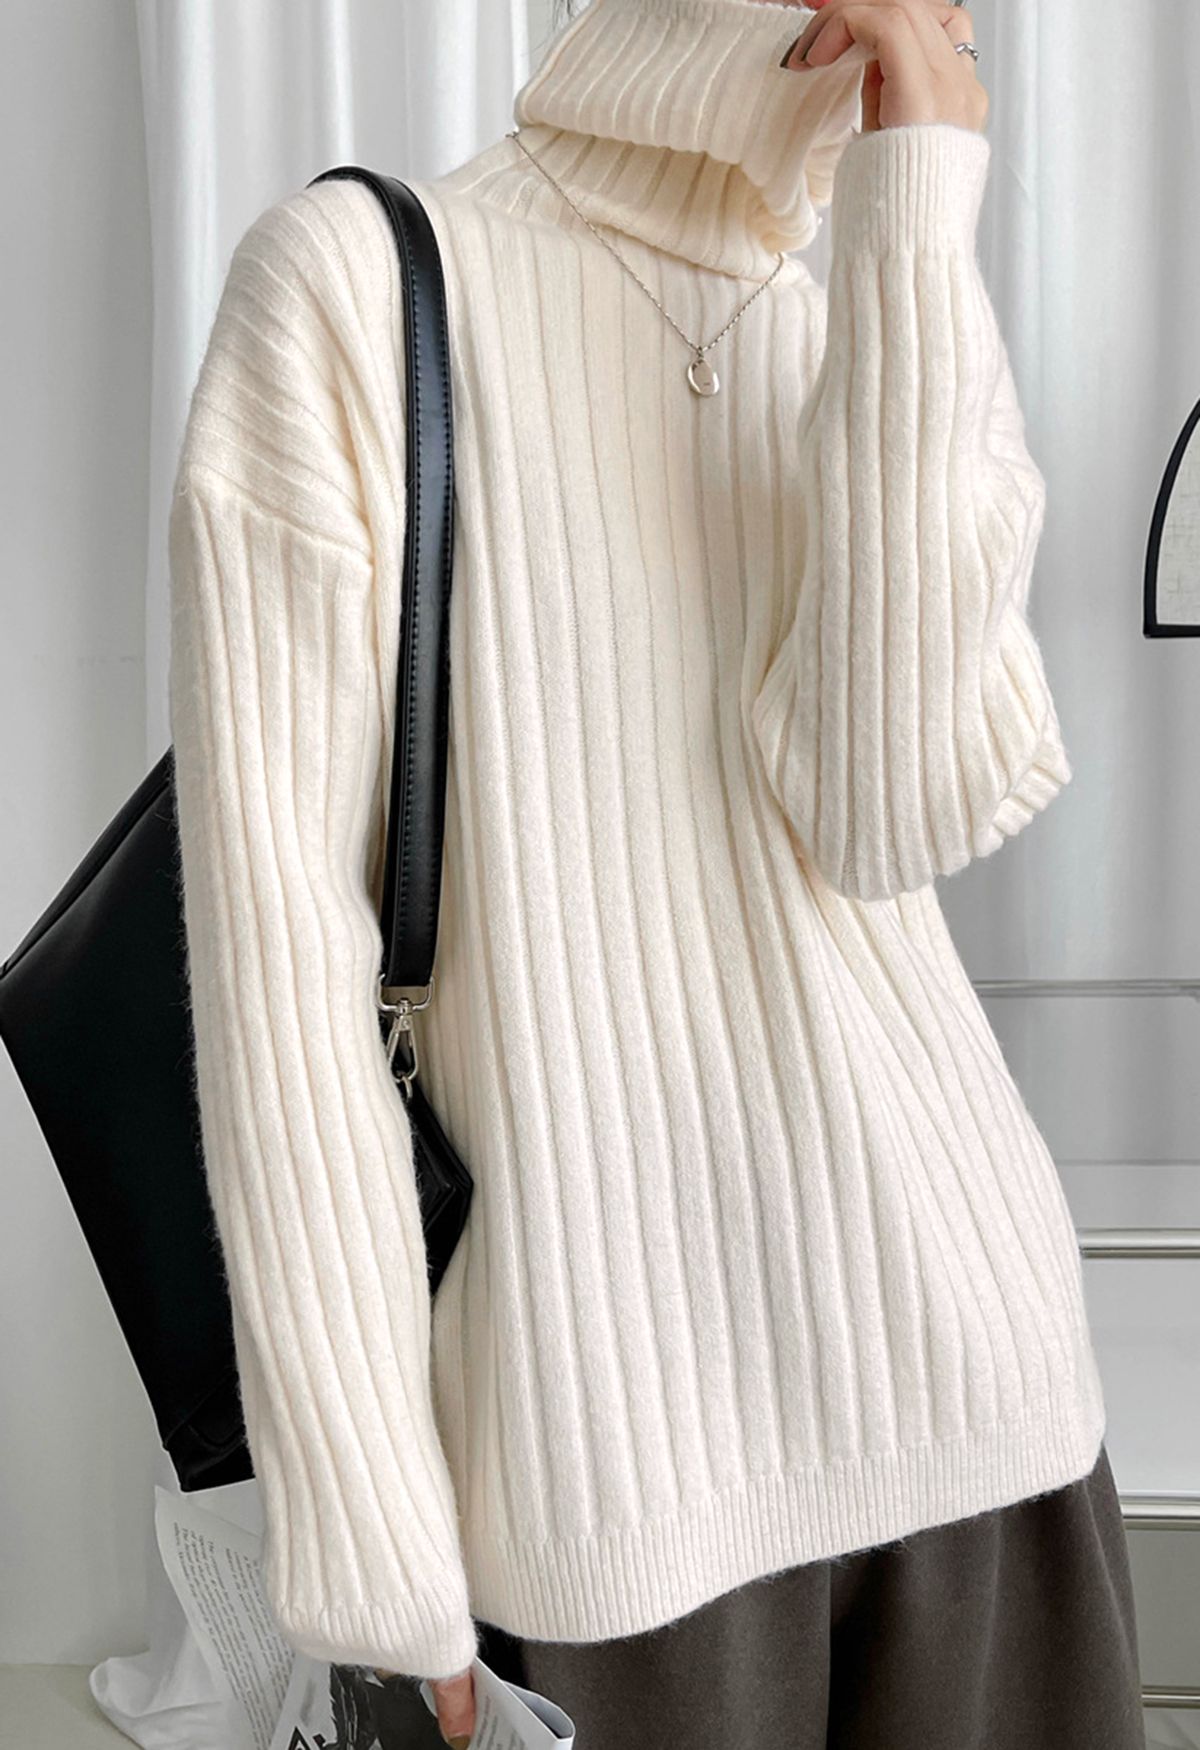 Turtleneck Sleeves Knit Sweater in White - Retro, Indie and Unique Fashion